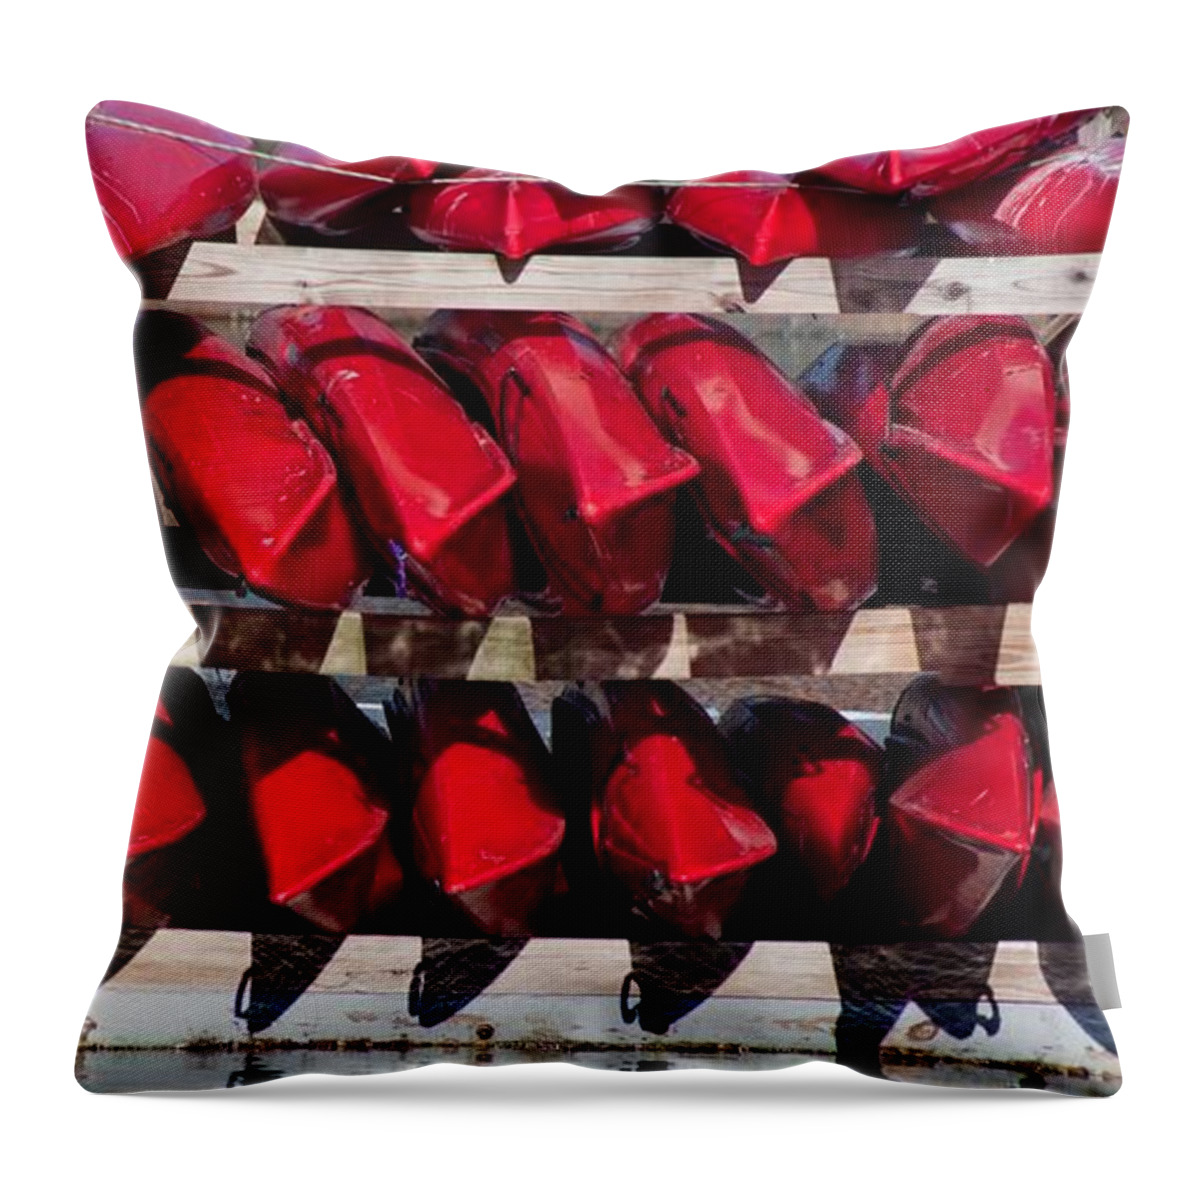 Color Throw Pillow featuring the photograph Red Kayaks by Thomas Marchessault